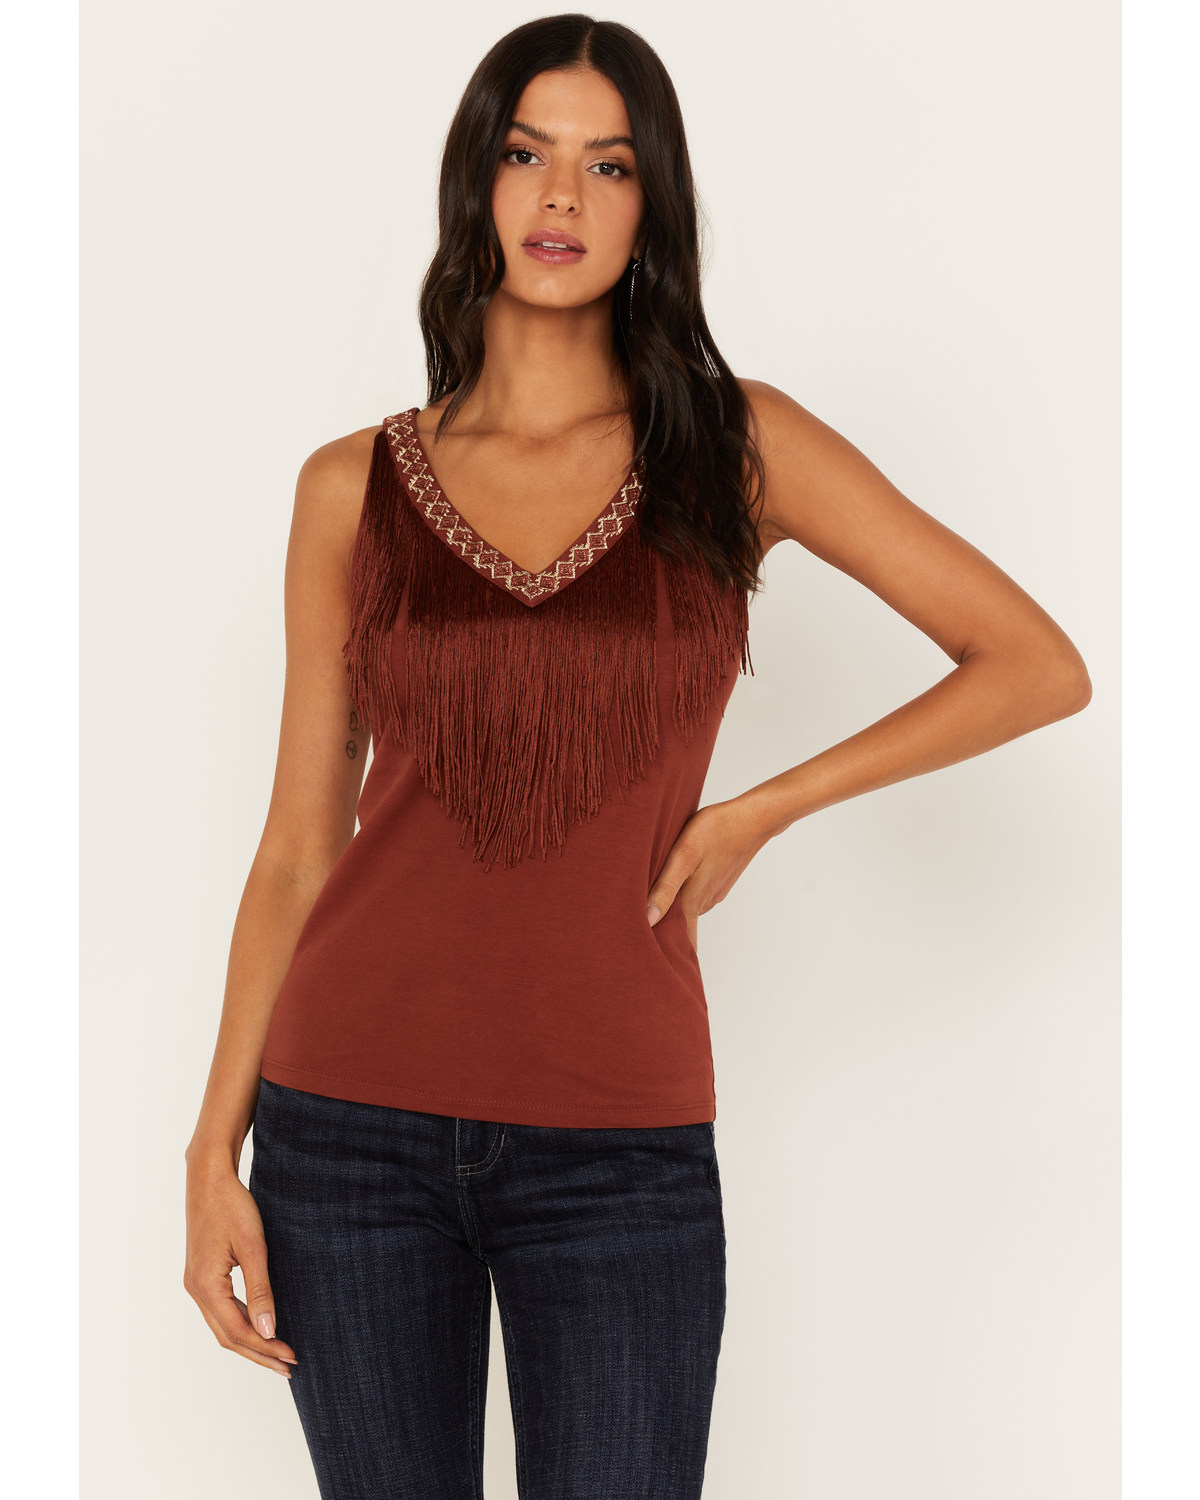 Idyllwind Women's Songstress Embroidered Fringe Tank Top